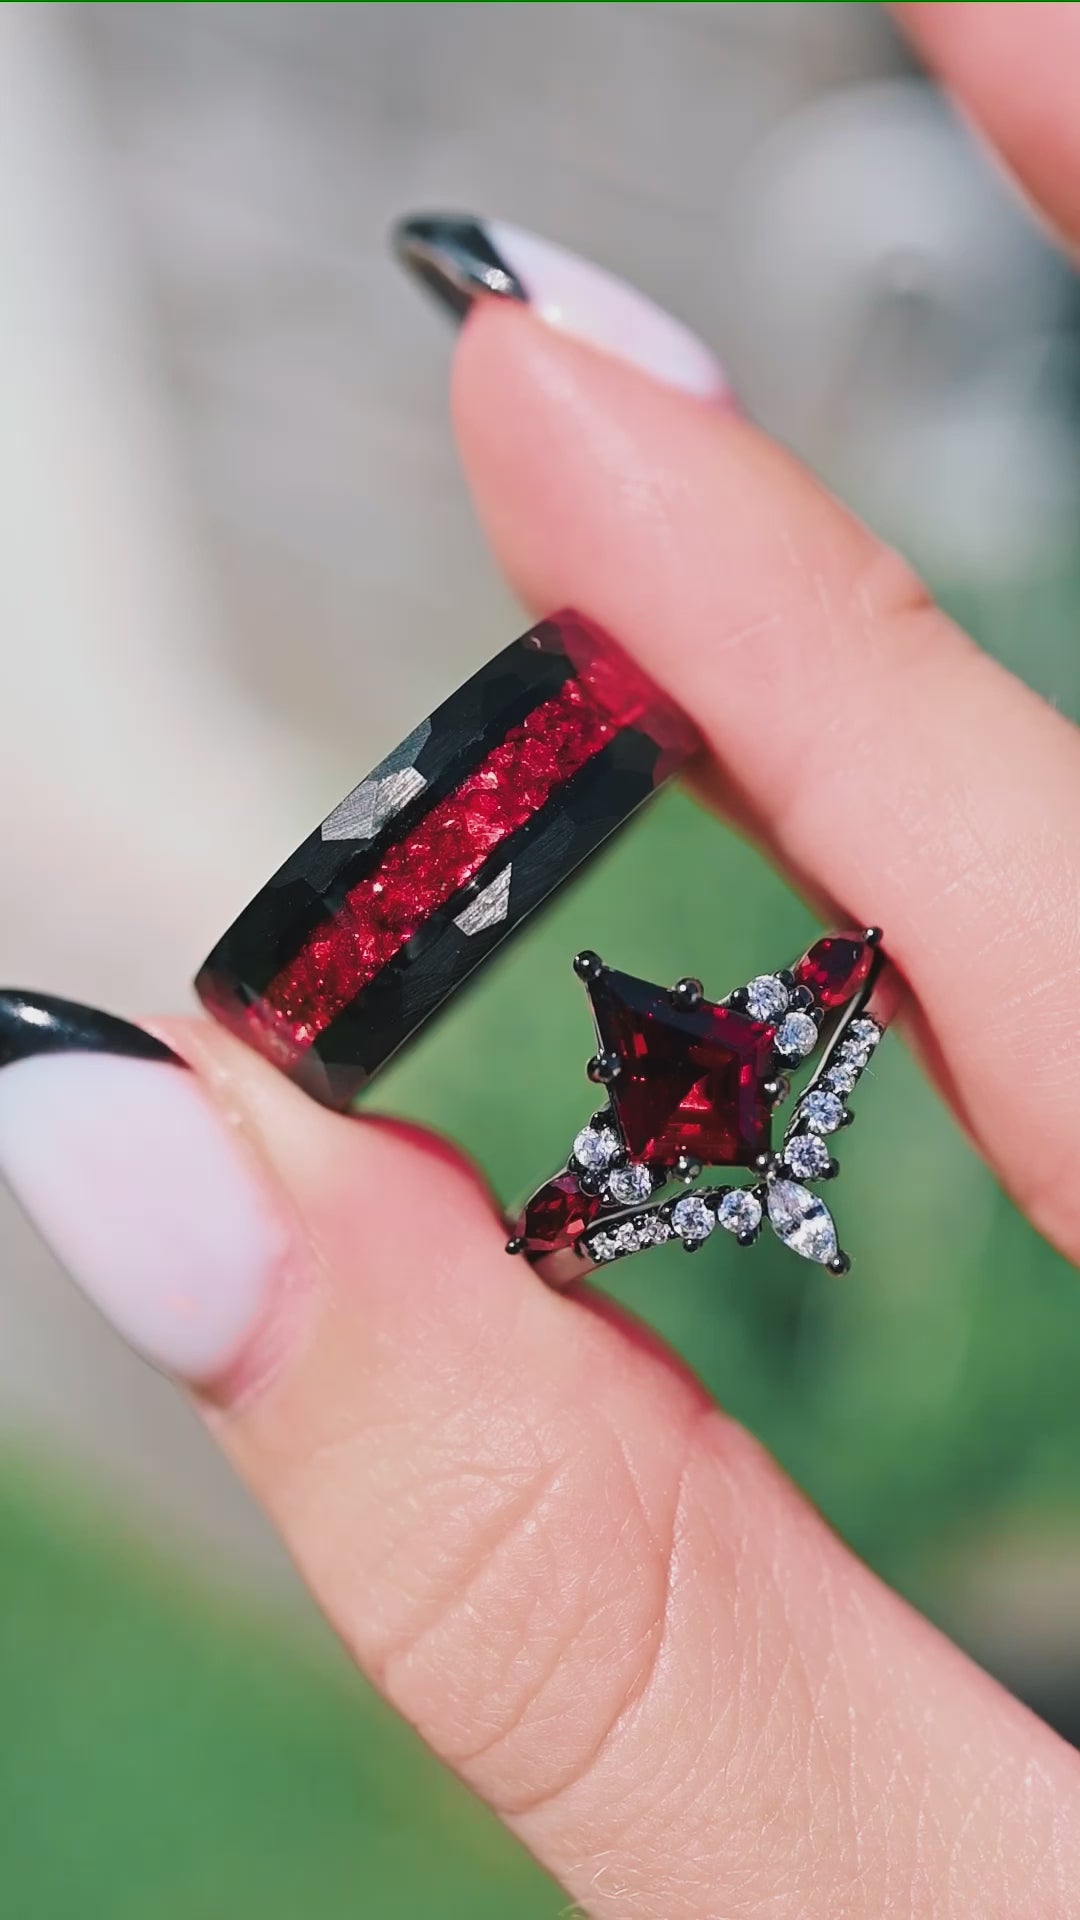 Skye Natural Red Garnet Couples Ring Set- His and Hers Matching Wedding Band